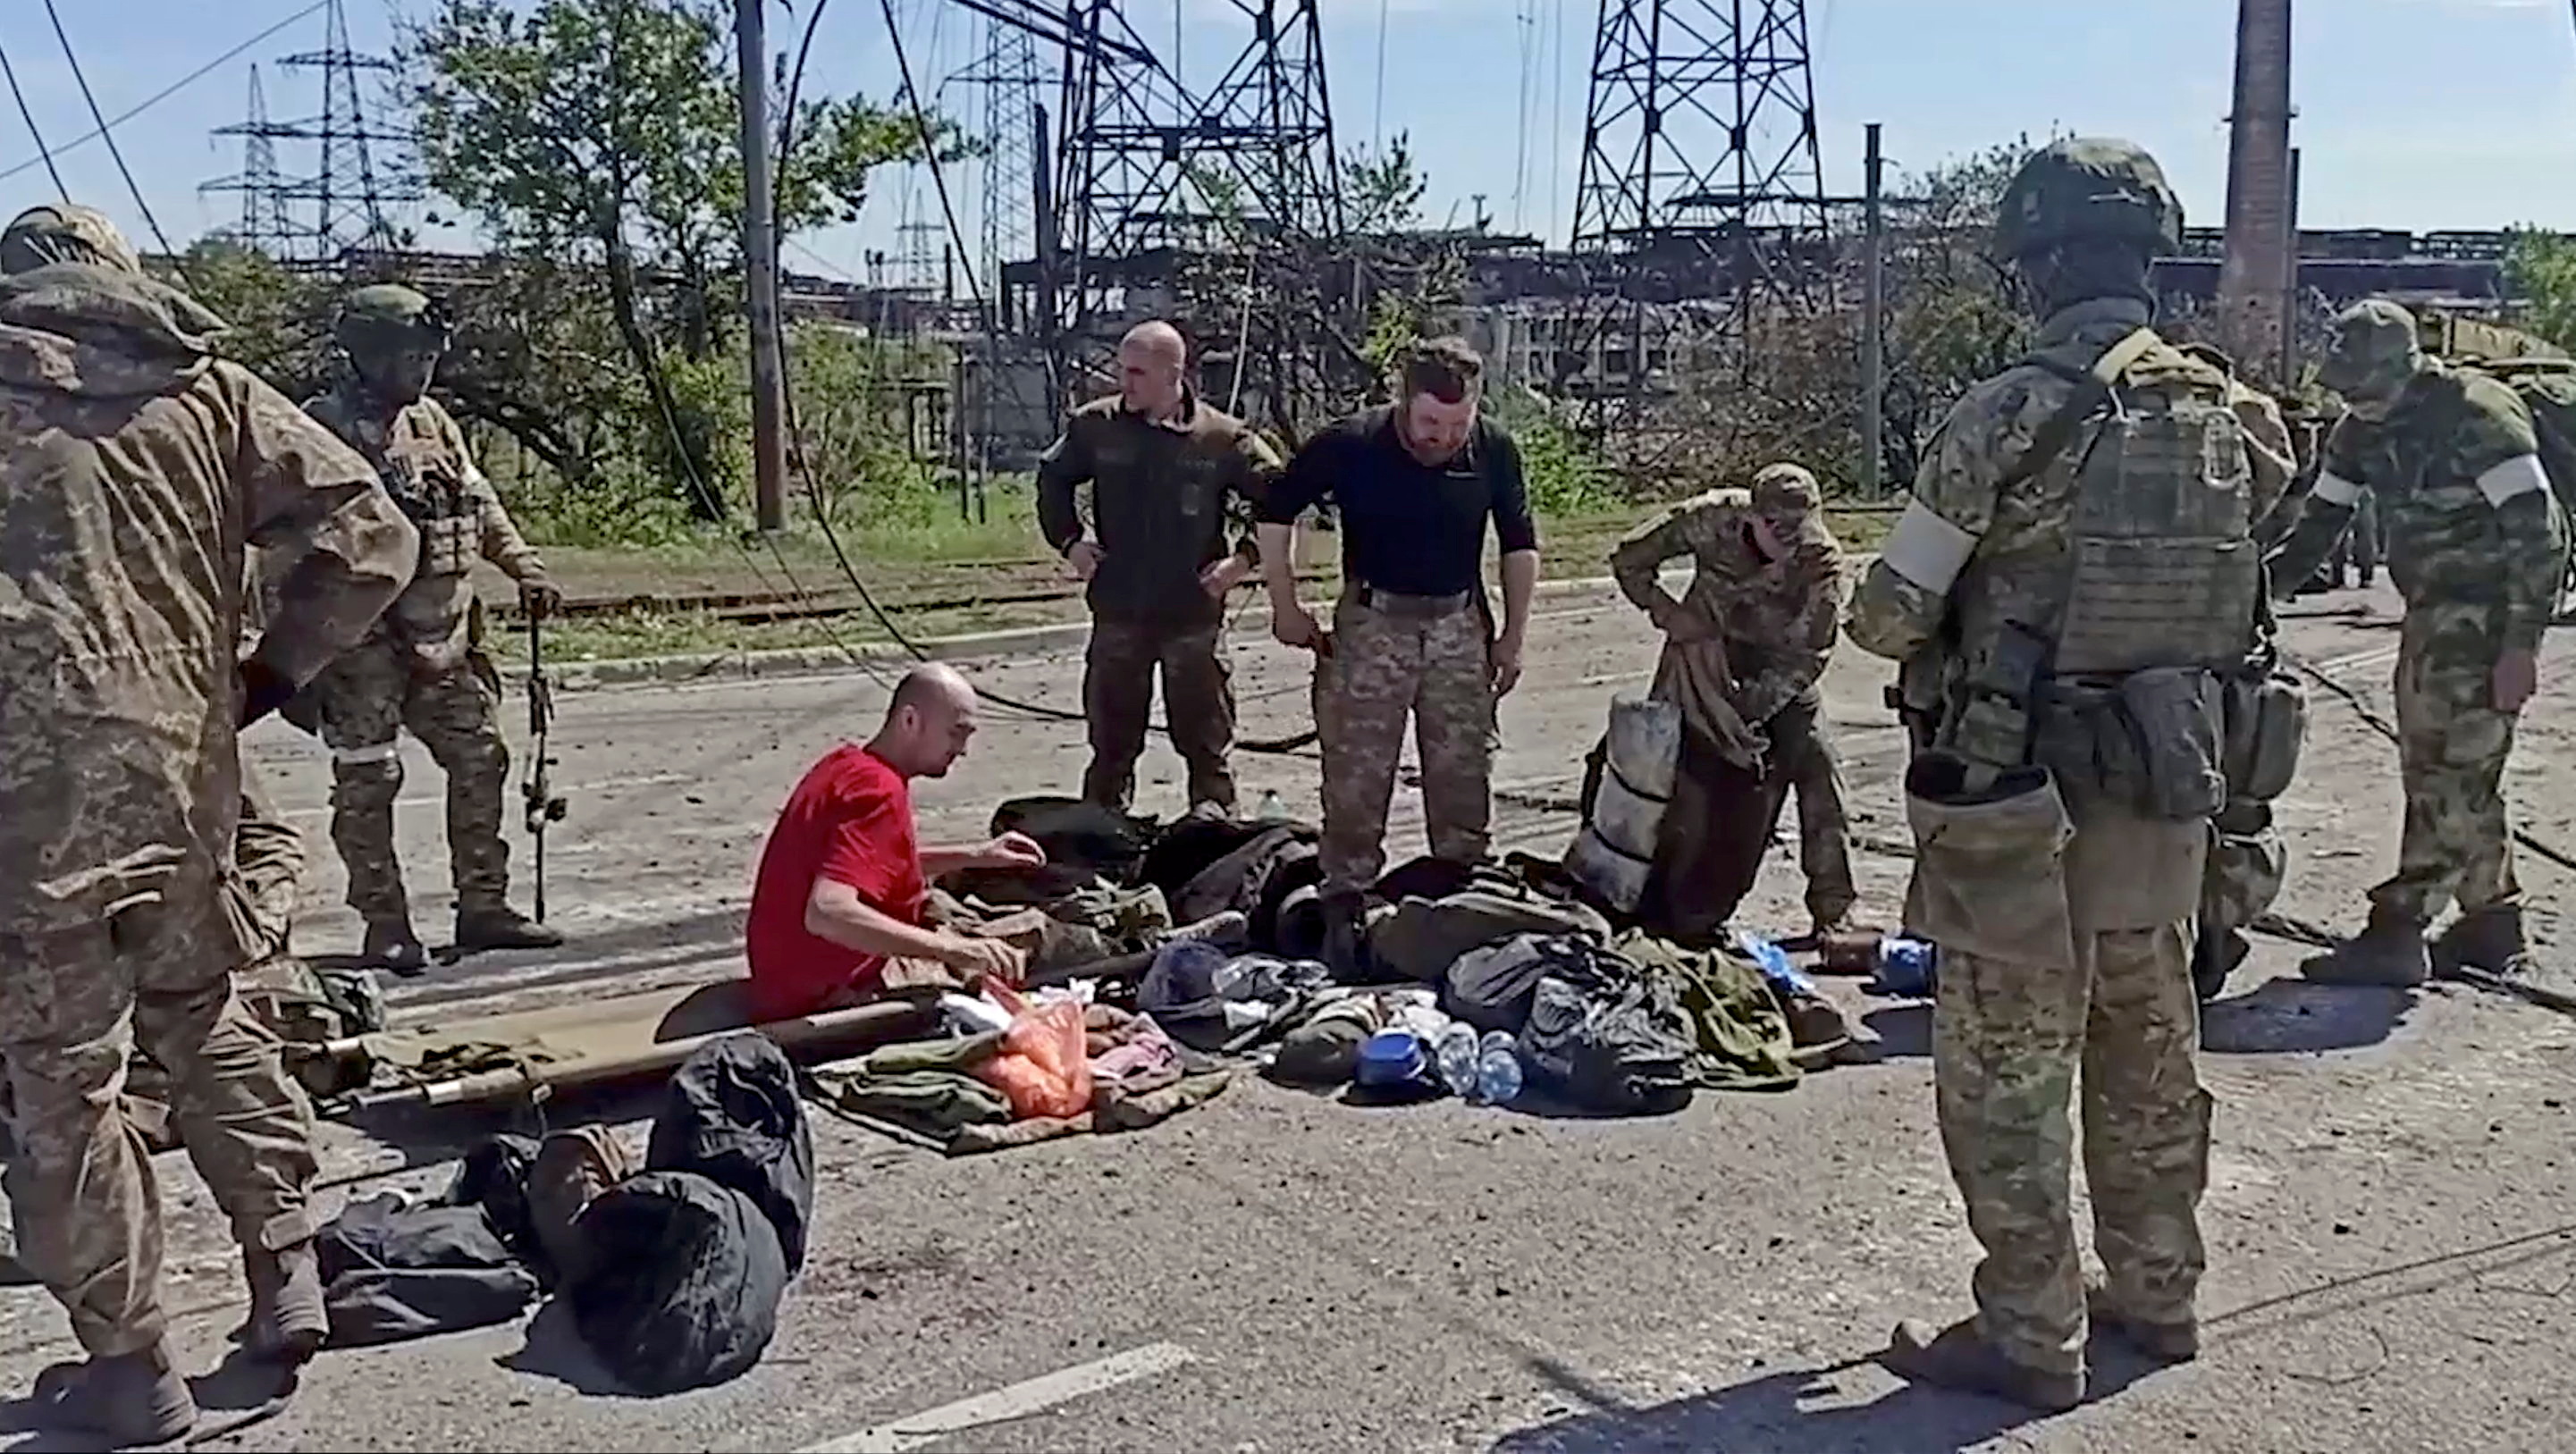 Russia Says Nearly 700 More Ukrainian Fighters Surrender in Mariupol